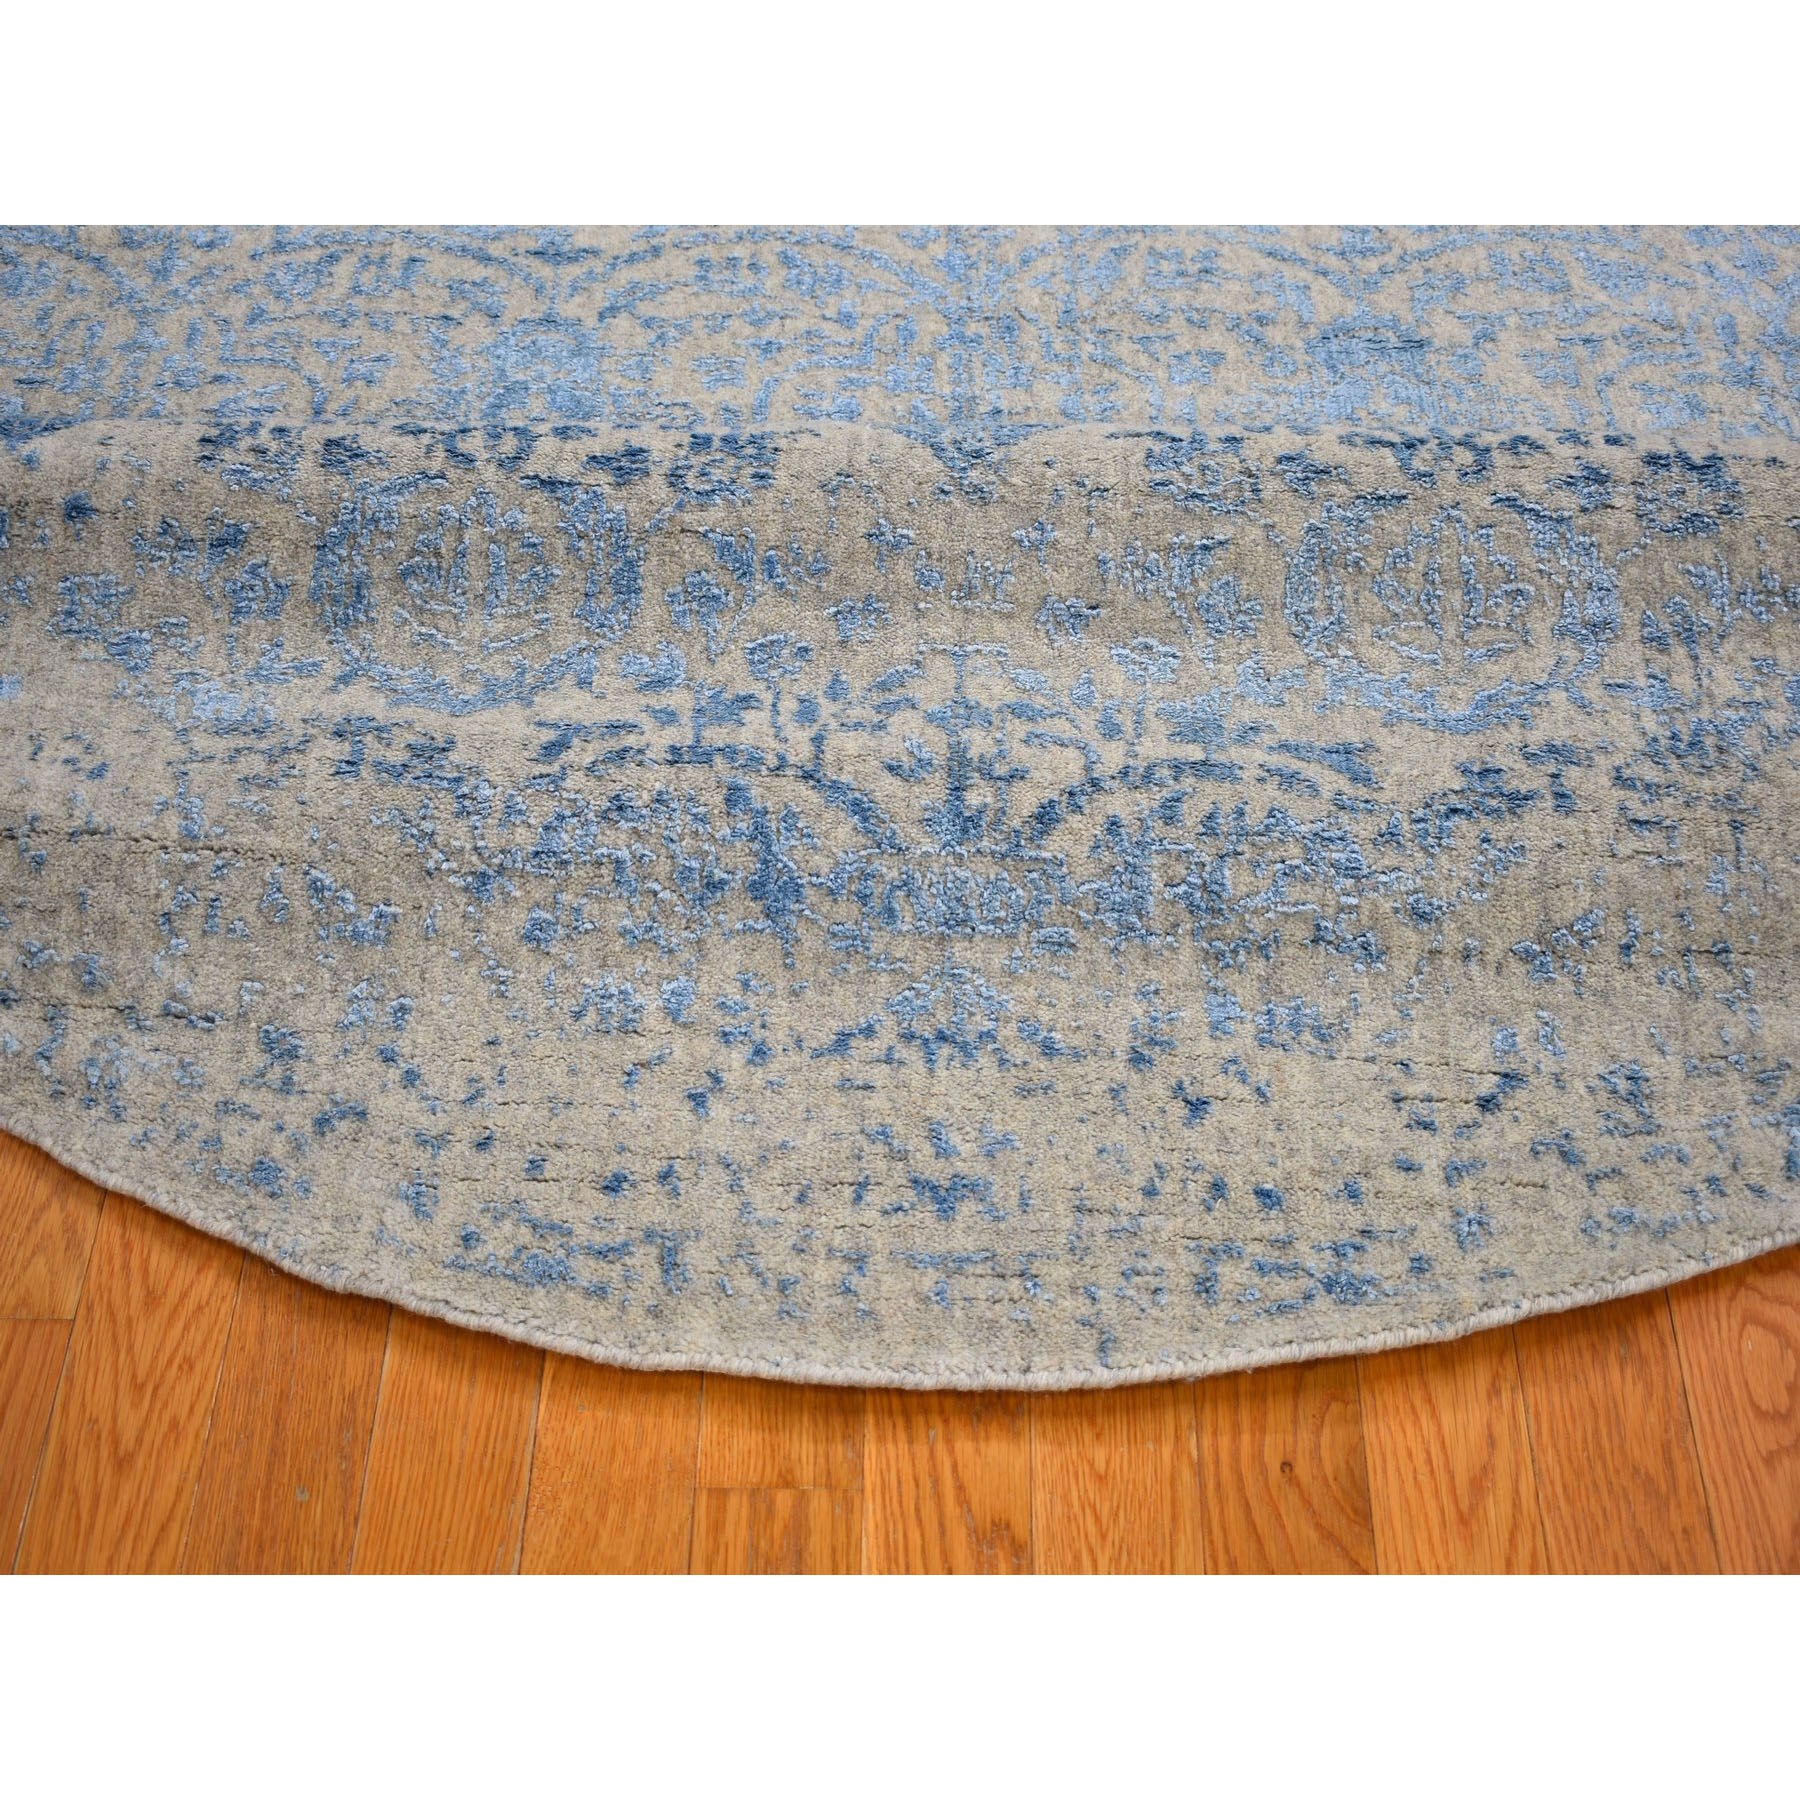 7-9 x7-9  Blue Jacquard Hand Loomed Wool and Art Silk Pomegranate Design Round Oriental Rug 